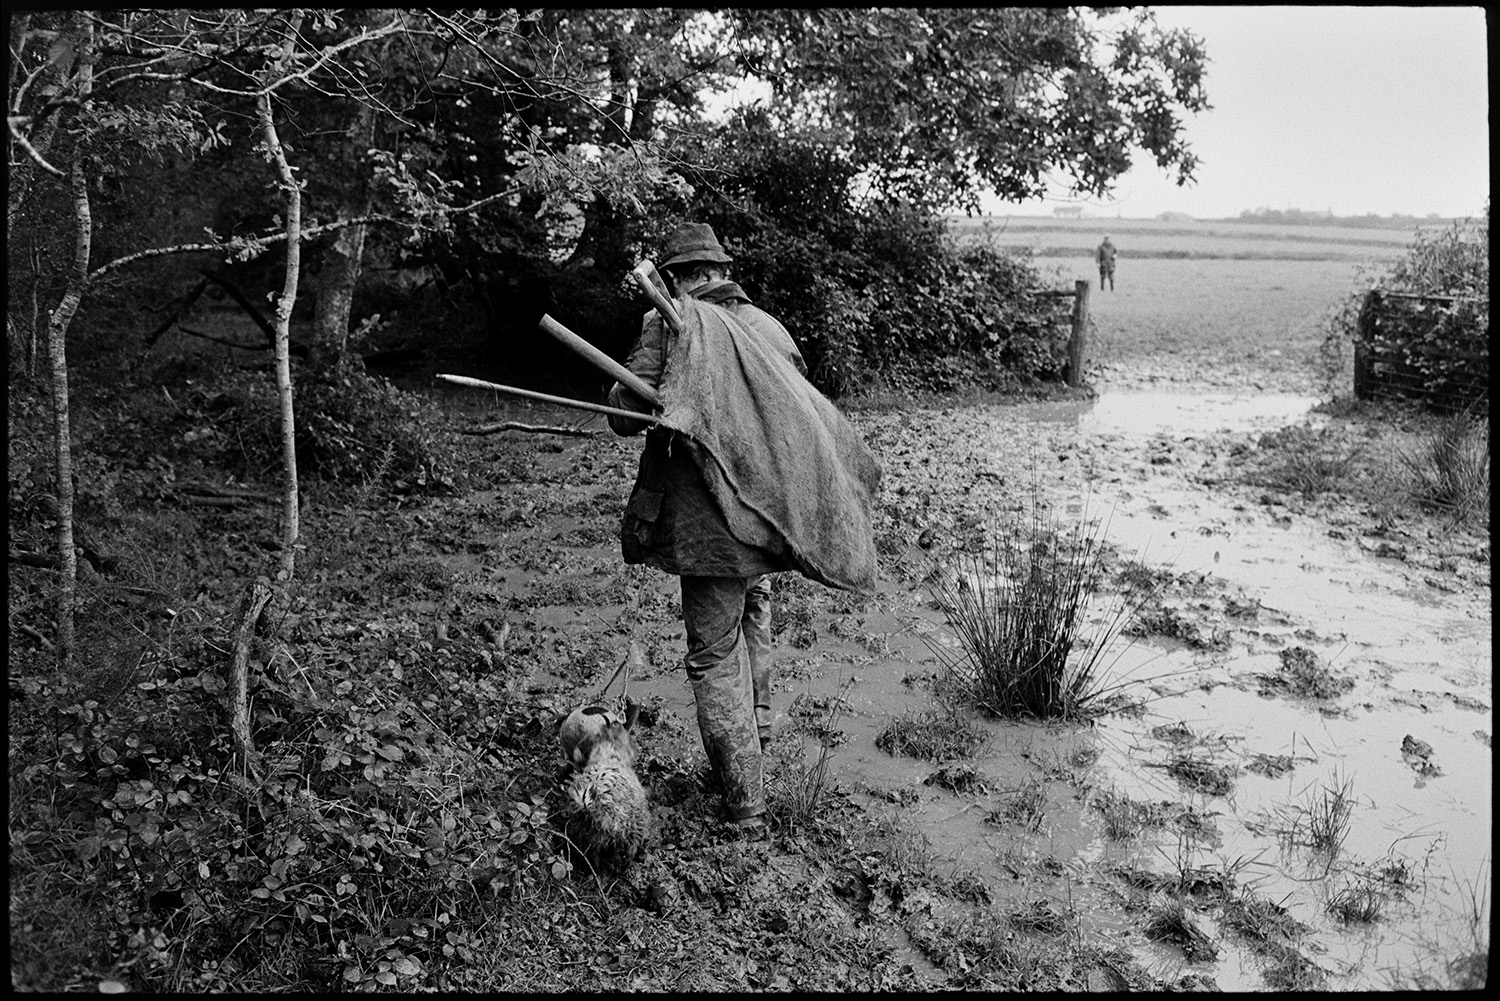 Huntsmen after digging out fox, terriers and diggers walking off in thick mud. 
[A man carrying a sack of tools walking through thick mud with two terriers, after digging out a fox from a hedgebank near Cudworthy, Devon.]